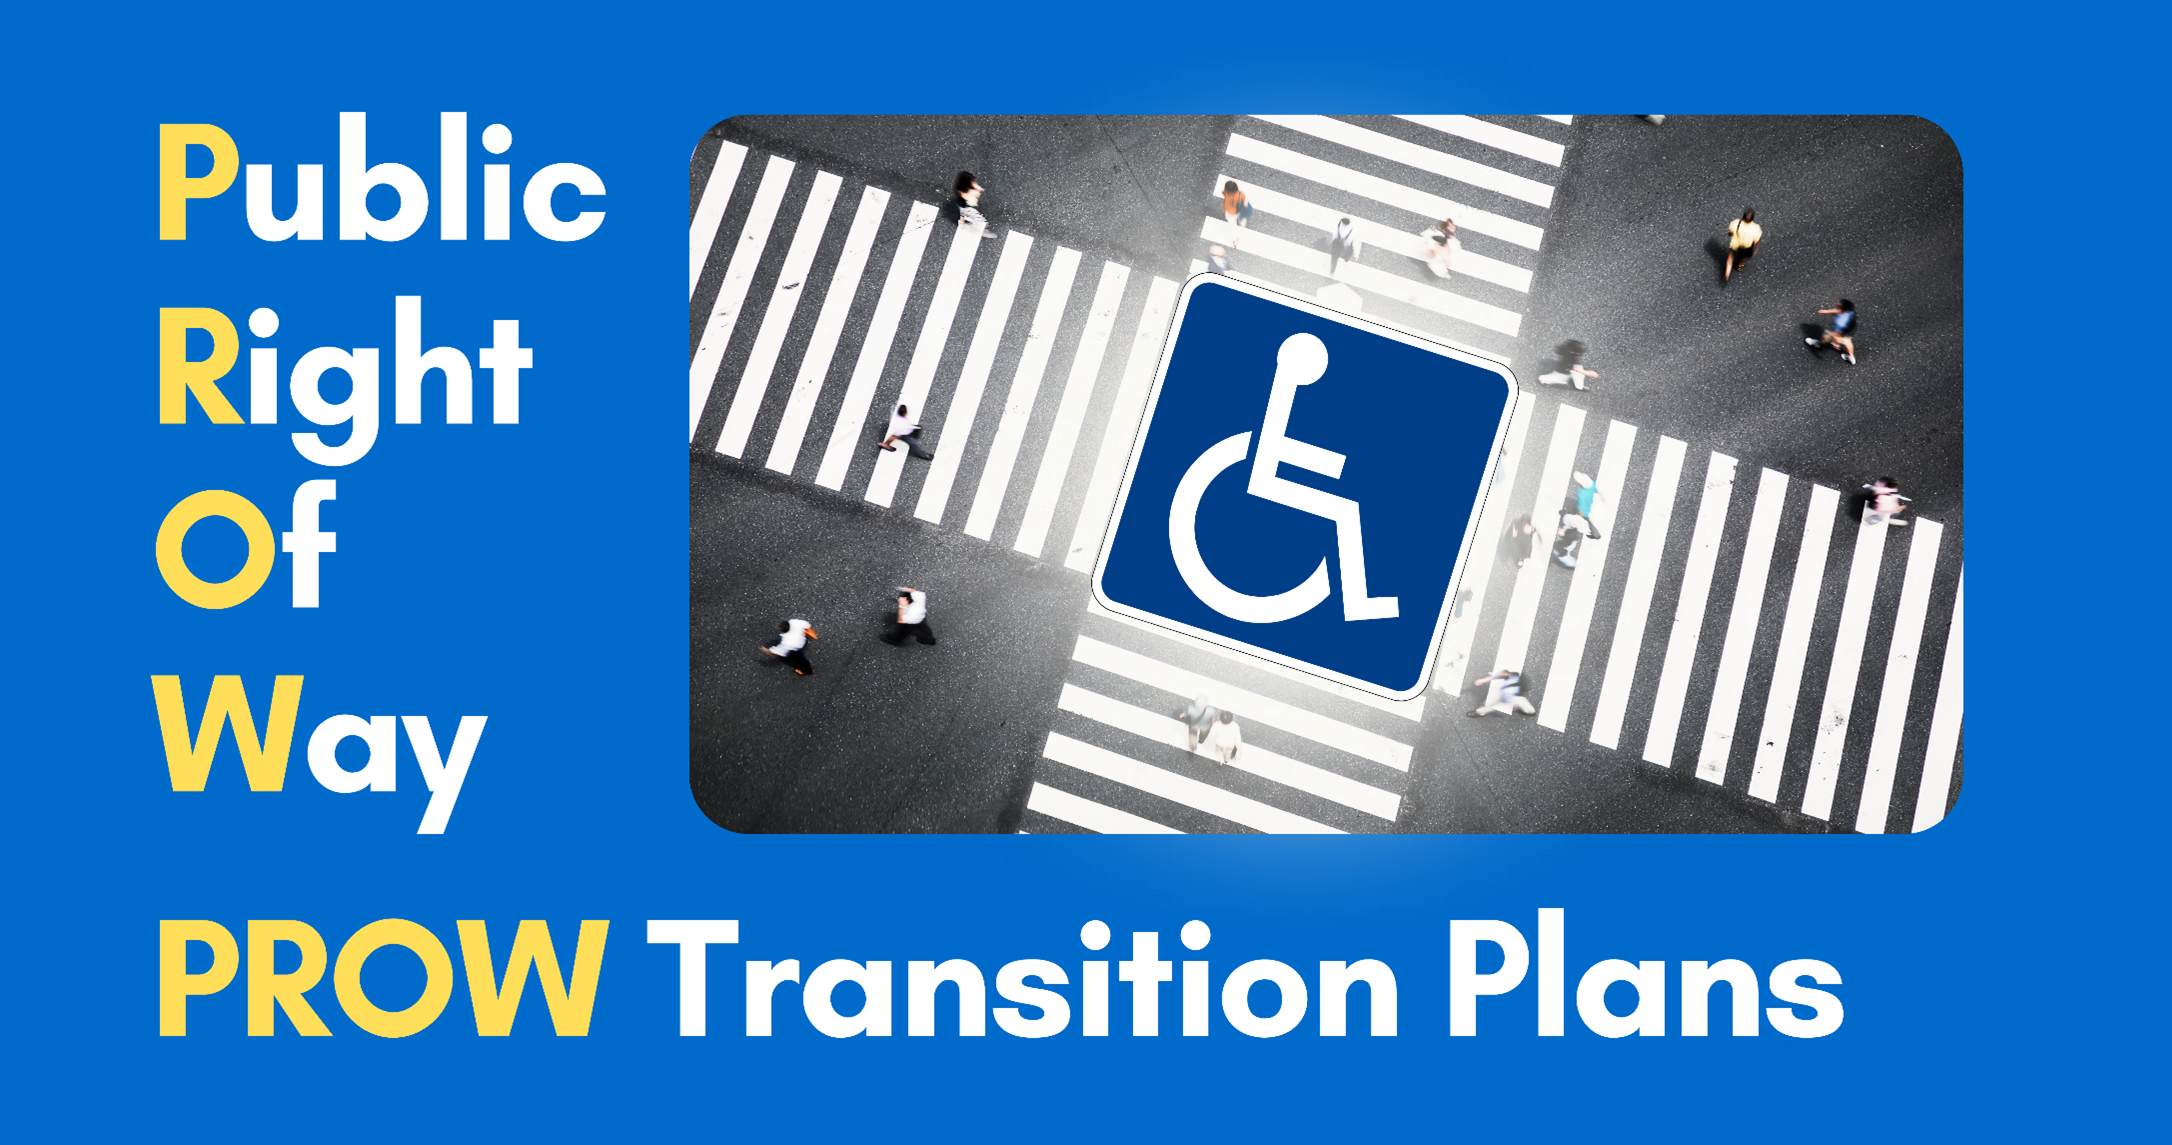 Public Right of Way PROW Transition Plans with image of intersection with accessible wheelchair symbol at the center of intersection with people crossing the intersection.